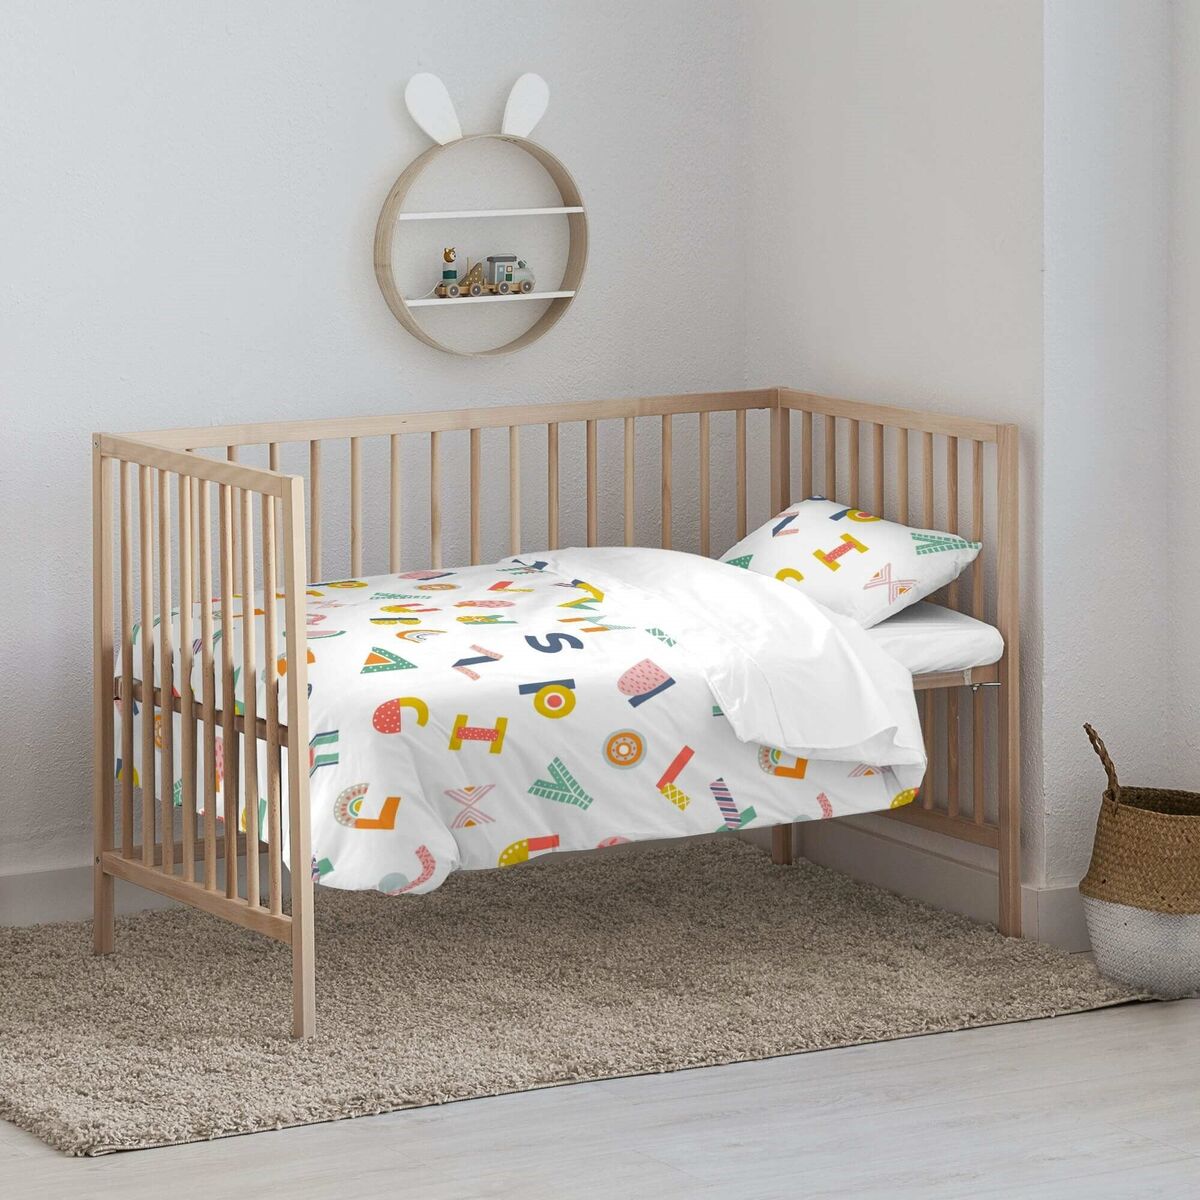 Cot Quilt Cover Kids&Cotton Urko Small 115 x 145 cm